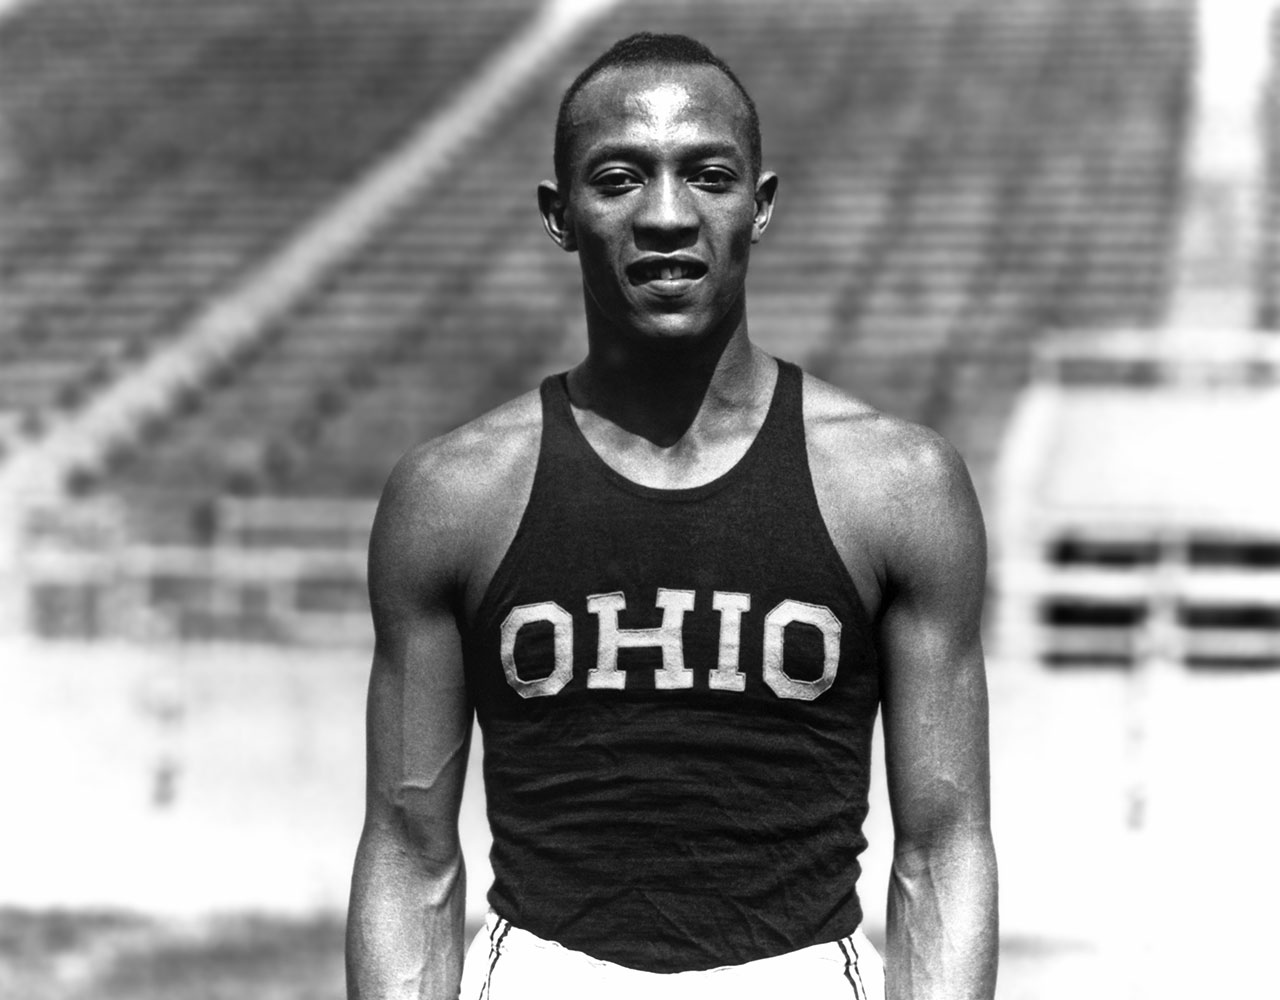 Jesse Owens, the first American track & field athlete to win 4 gold medals in a single Olympiad. Source